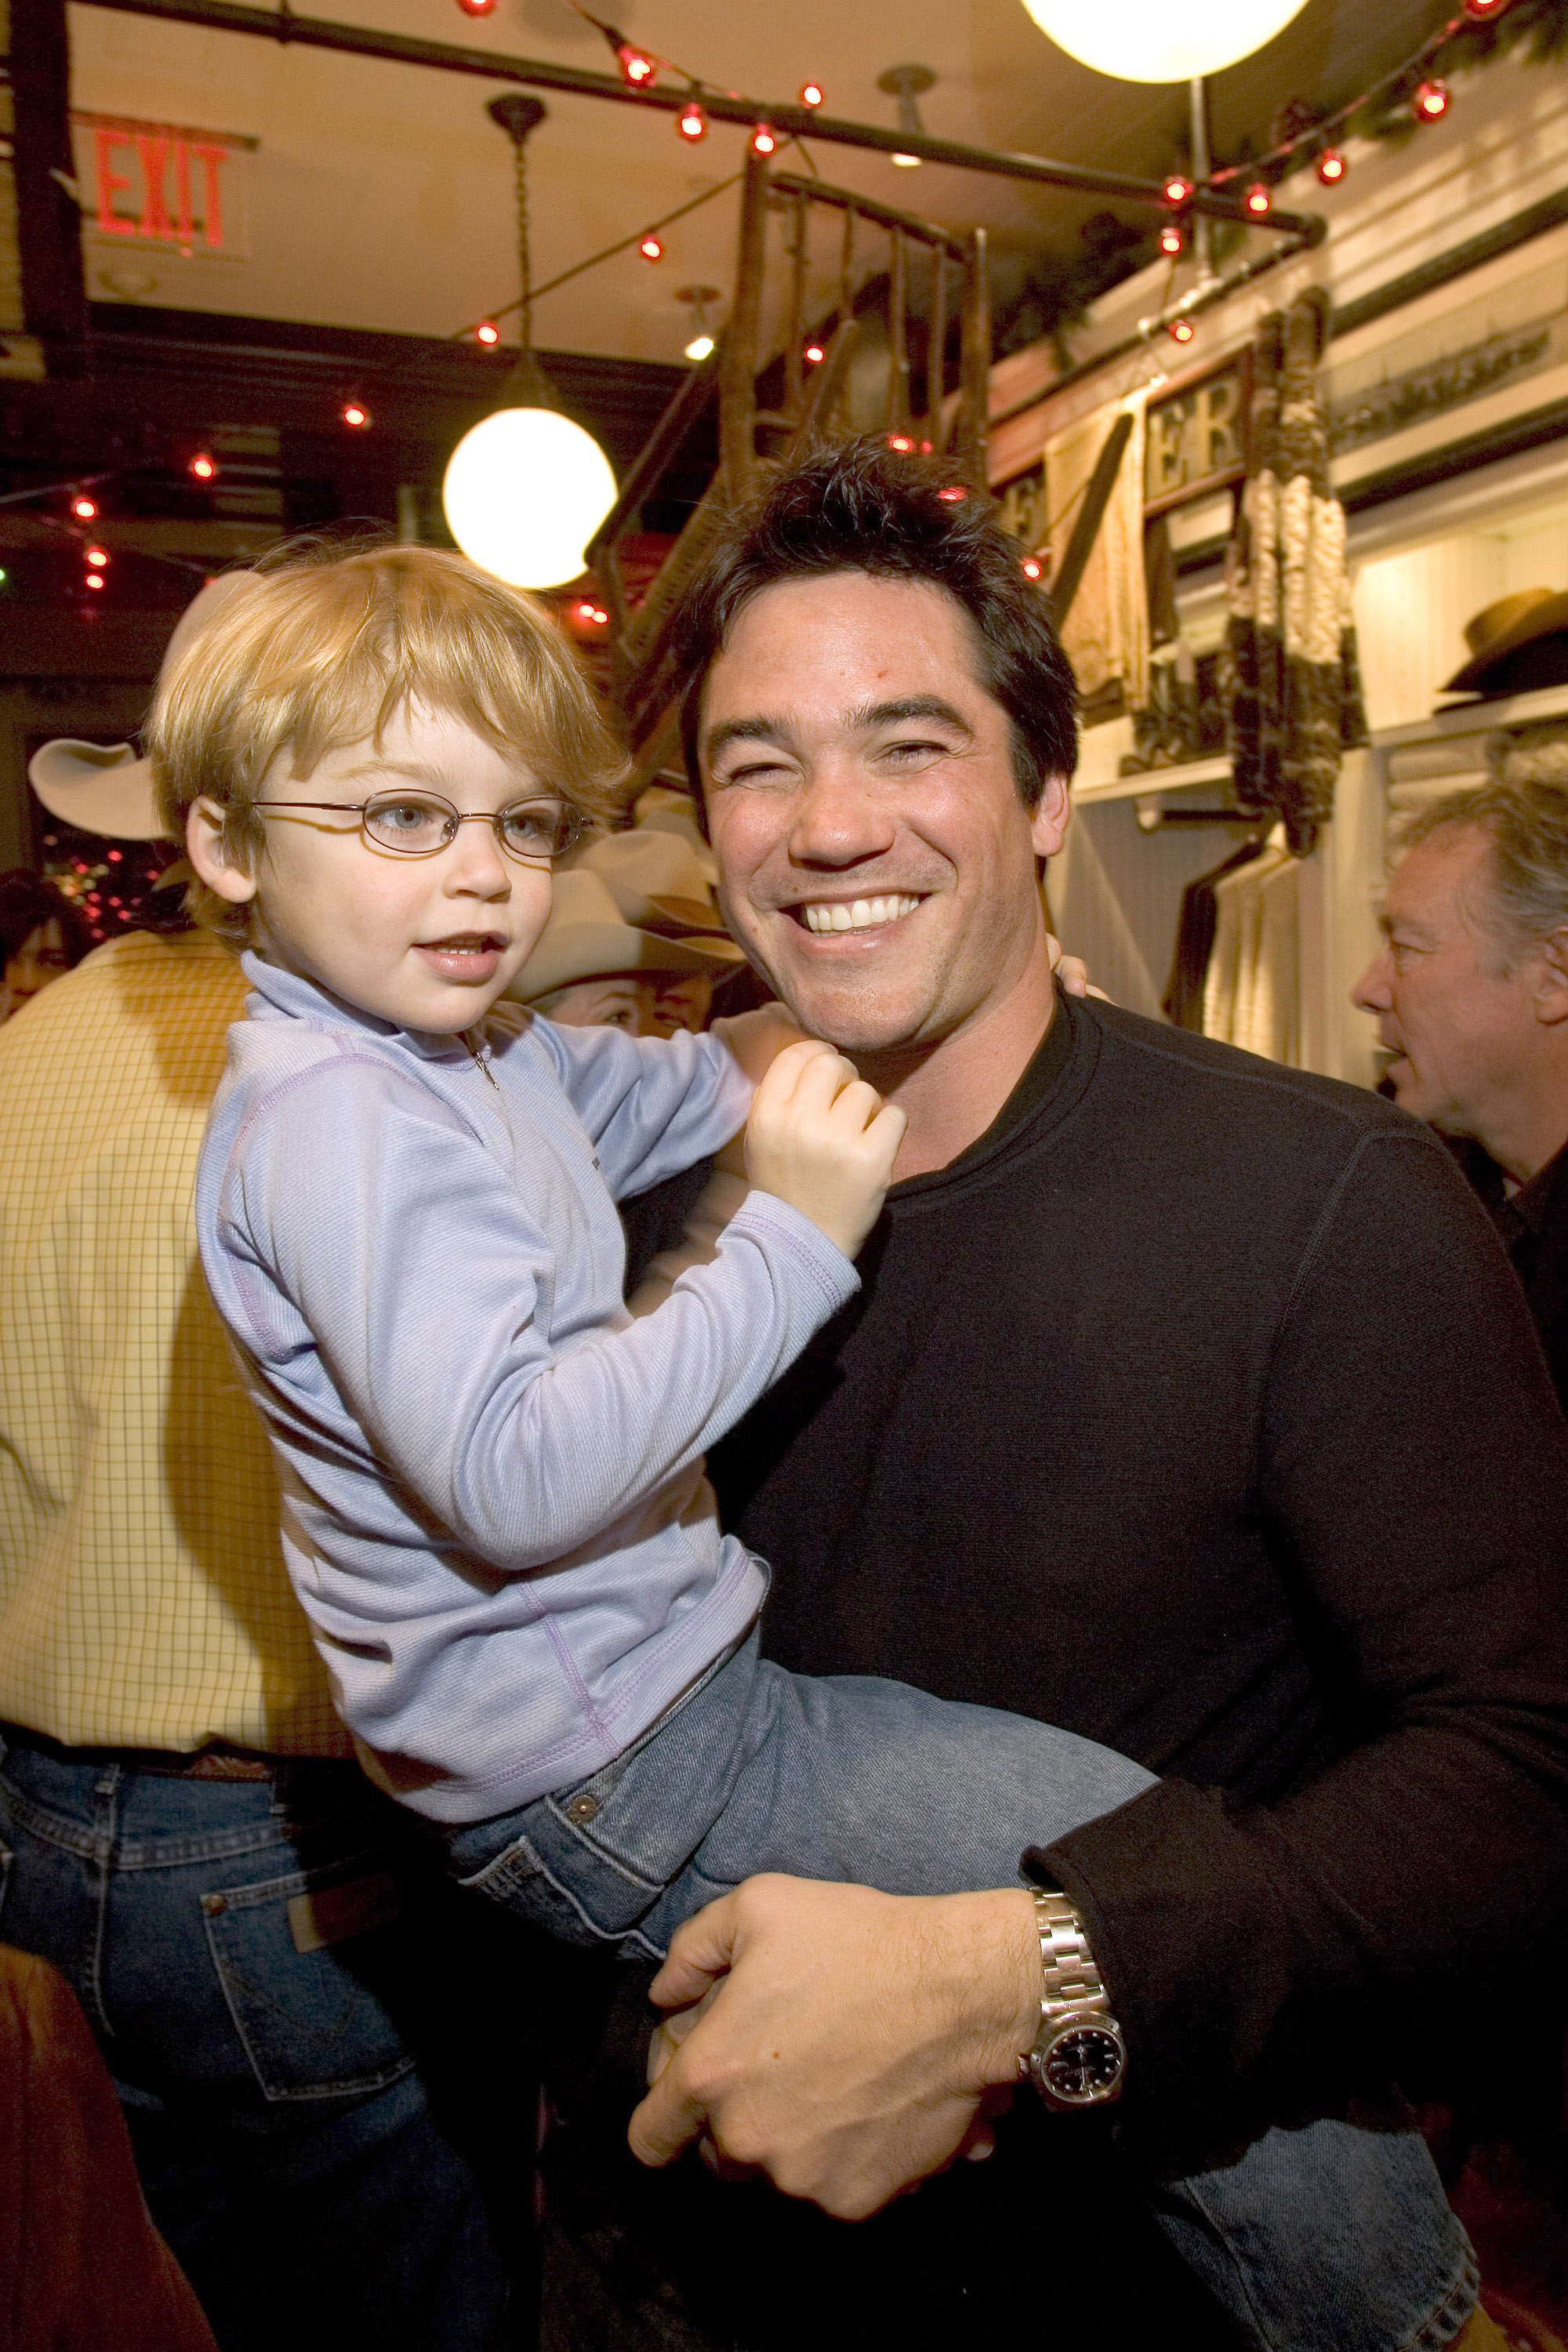 Christopher and Dean Cain at the opening of the new Ralph Lauren Aspen store in Aspen, Colorado in 2004 | Source: Getty Images